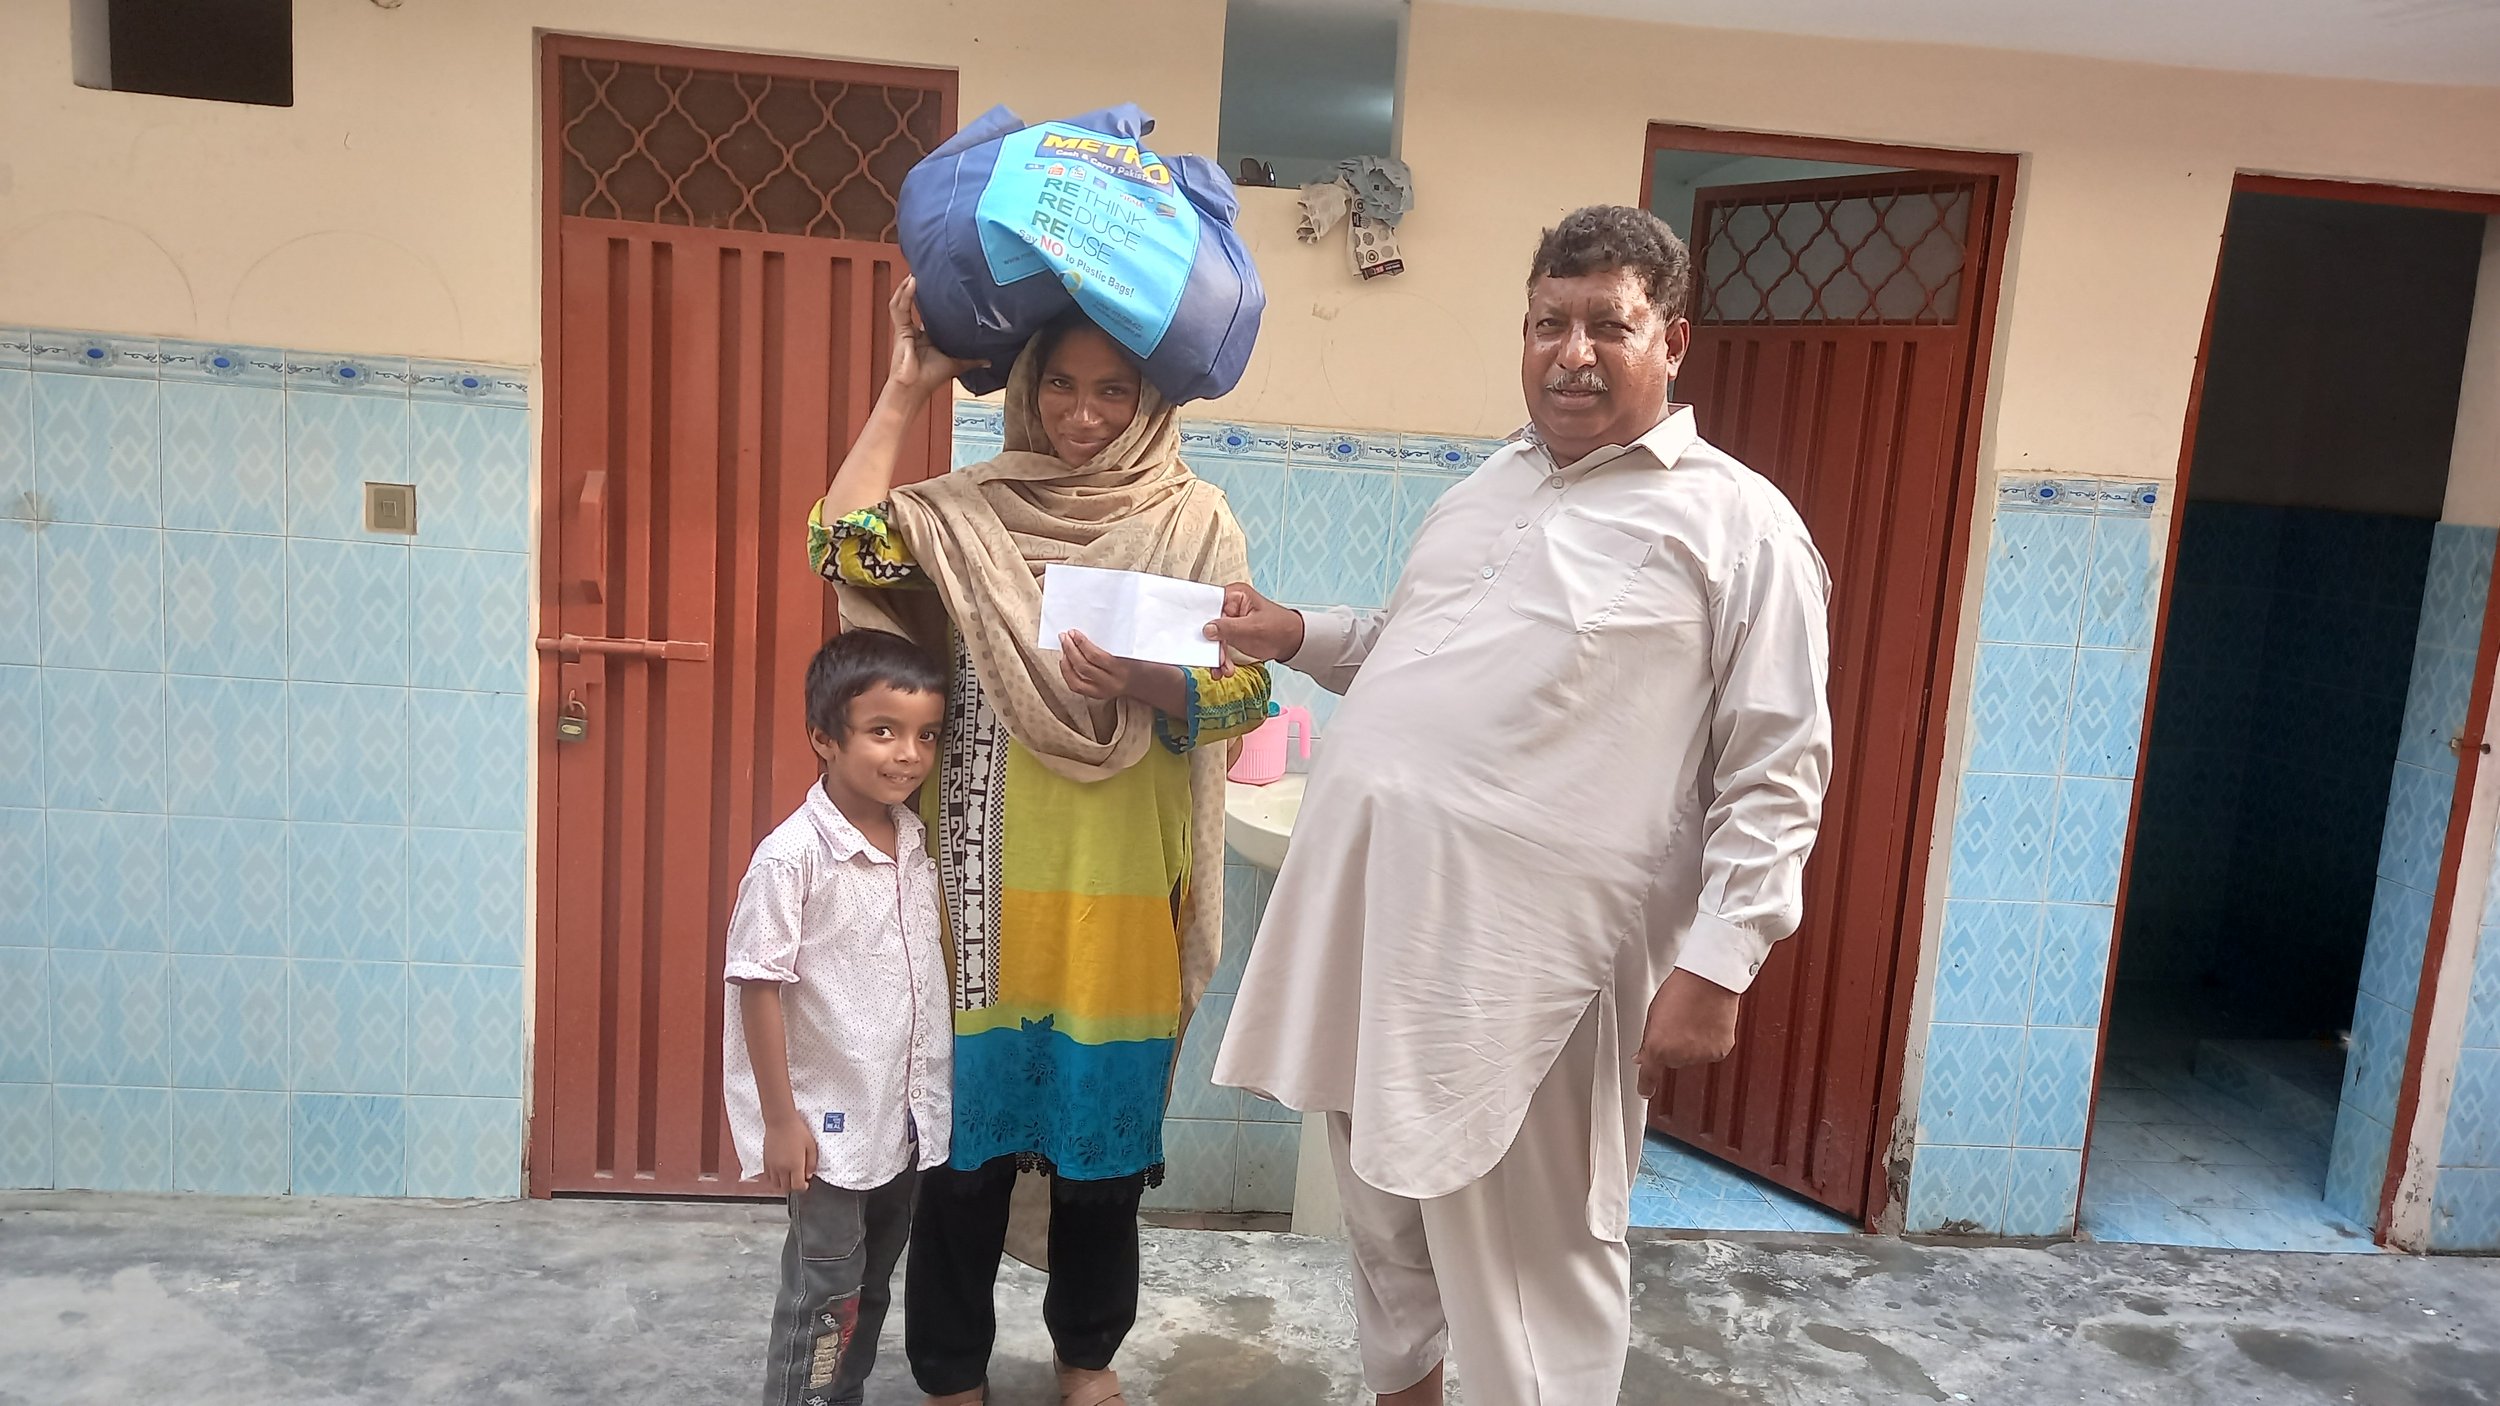  Widow Shakeela received food bag &amp; support happily from Pastor Saleem Raza 